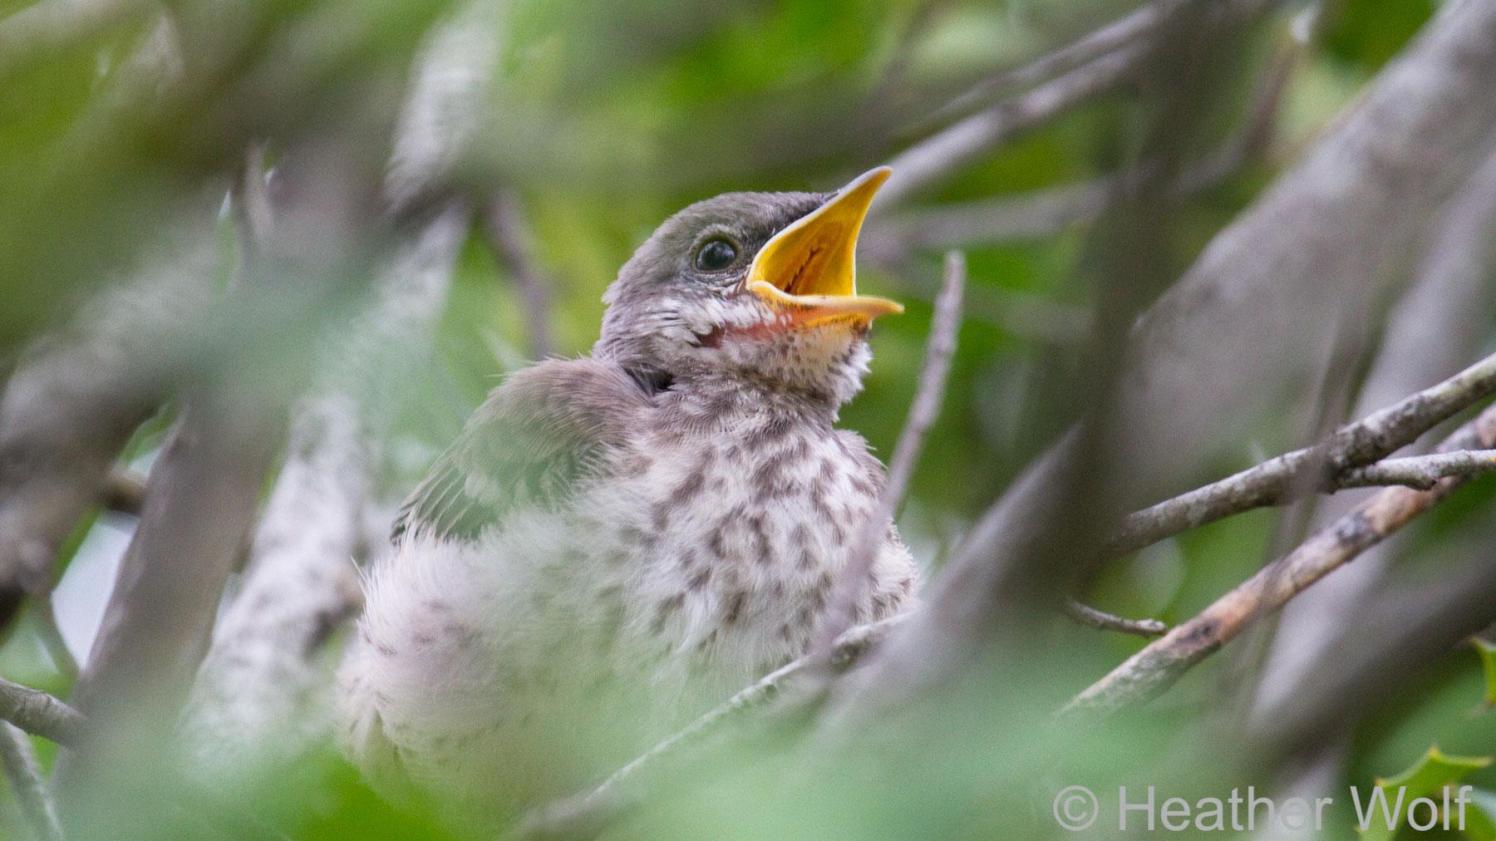 Northern Mockingbird Fledgling with mouth open sitting in branches.